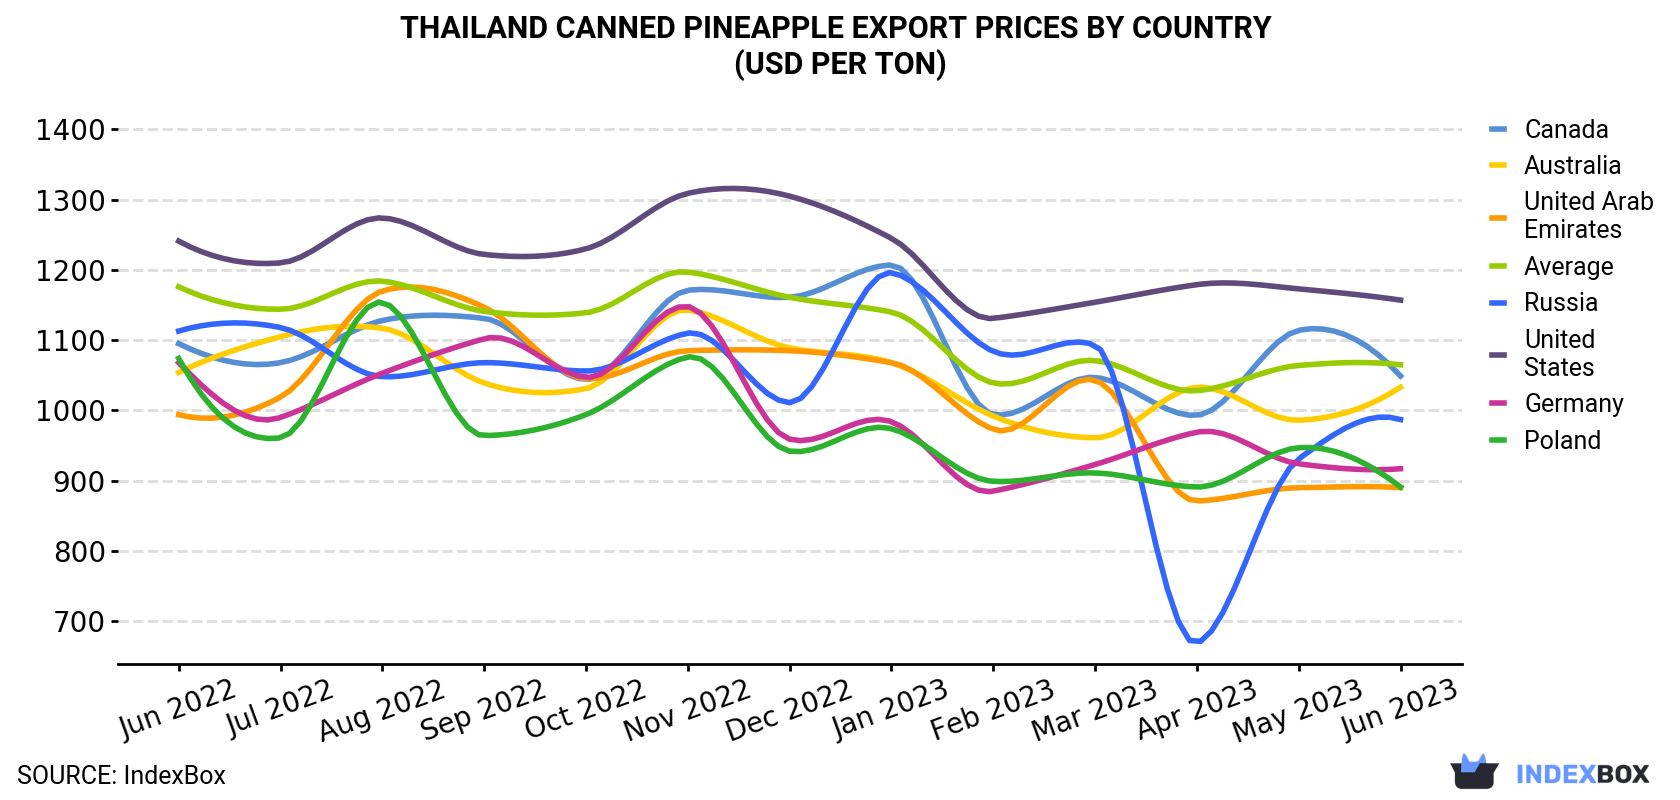 Thailand Canned Pineapple Export Prices By Country (USD Per Ton)